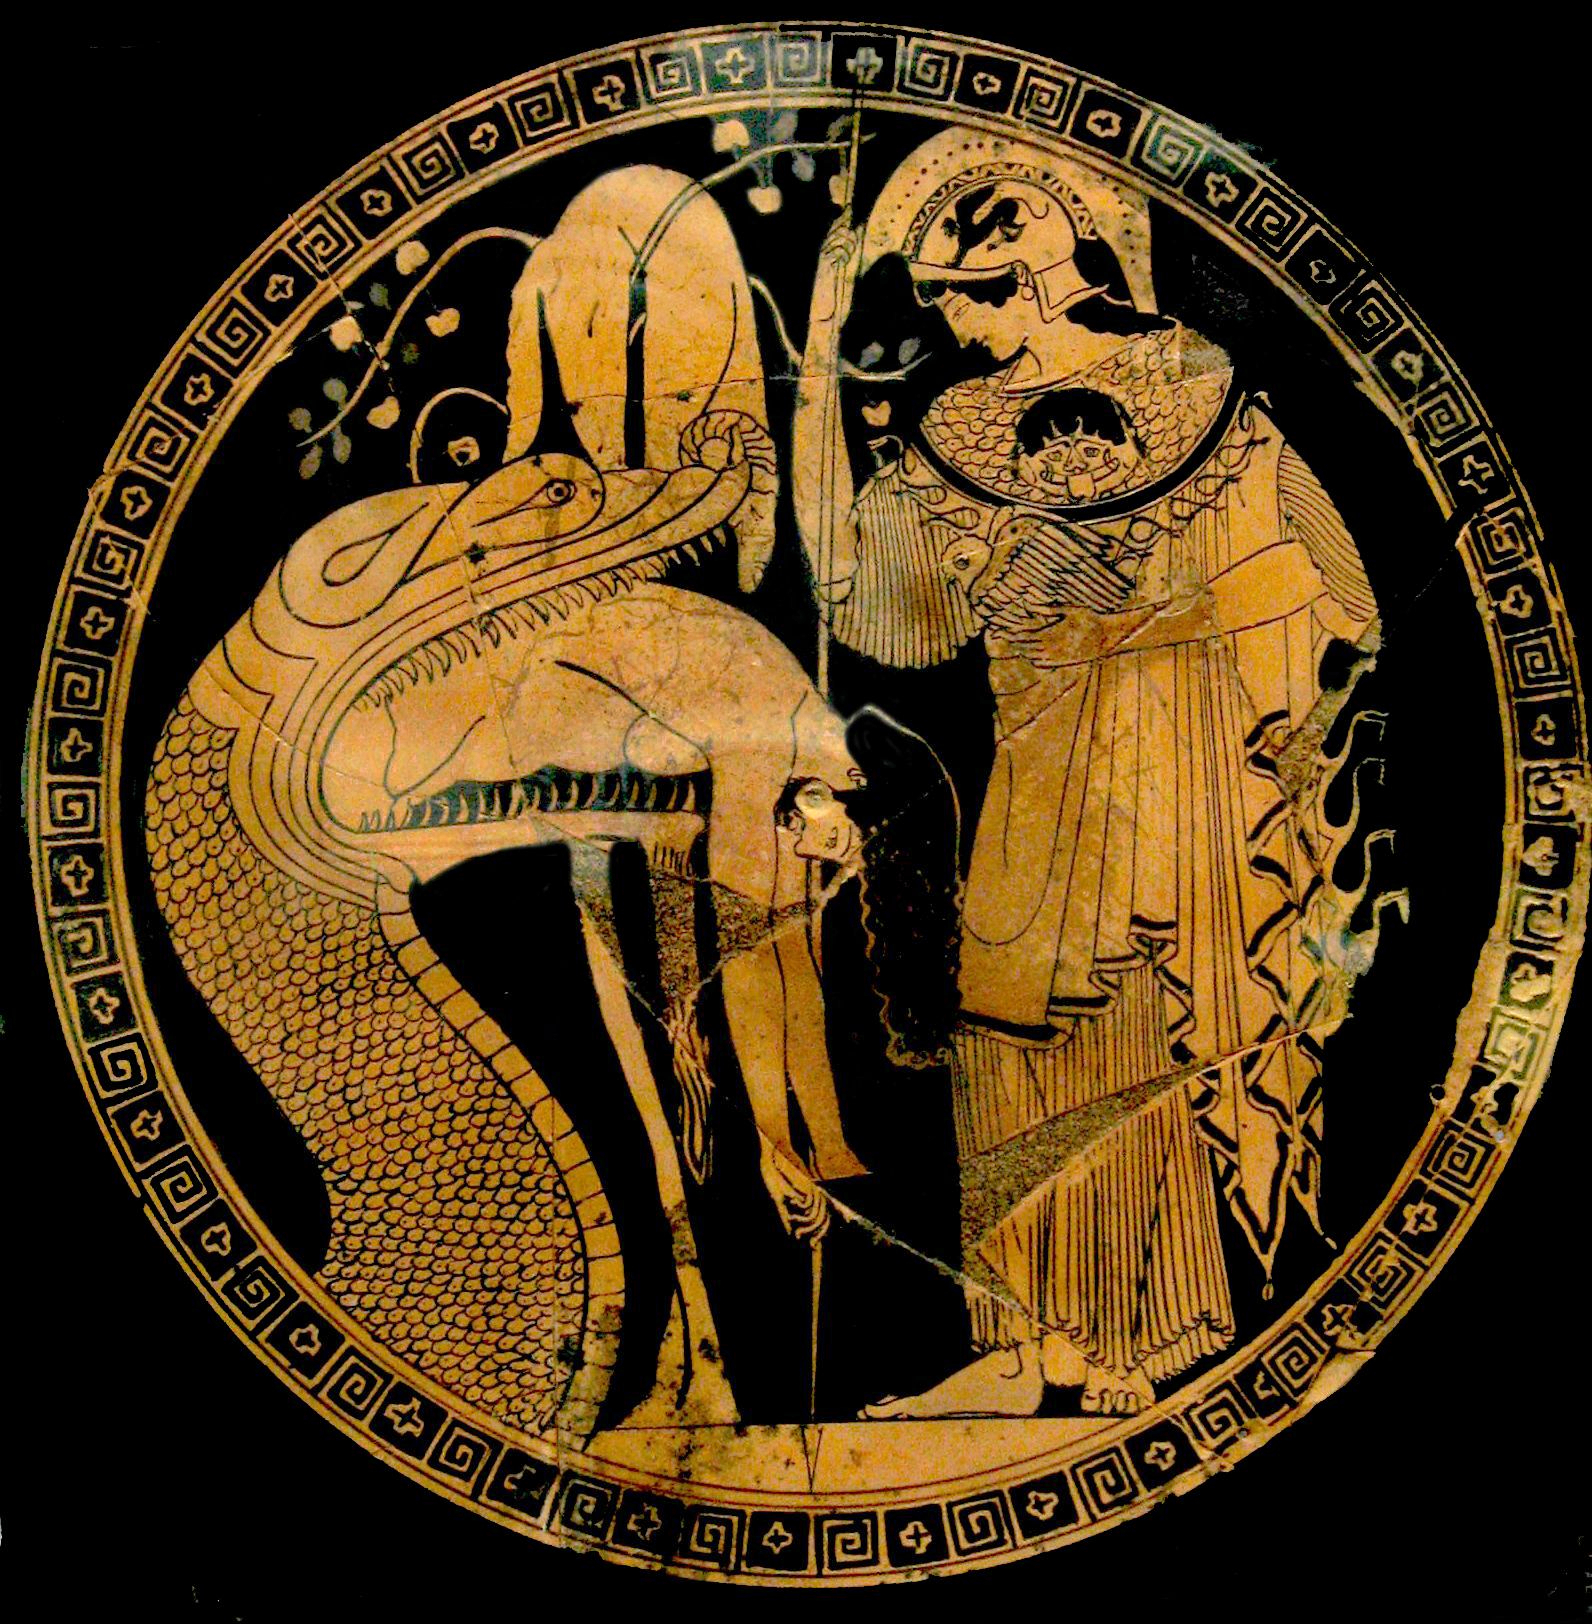 Jason hangs limply from the mouth of a dragon, with the Golden Fleece hanging from a tree in the background. Athena stands over Jason, wearing a battle helmet, and holding a spear and an owl.